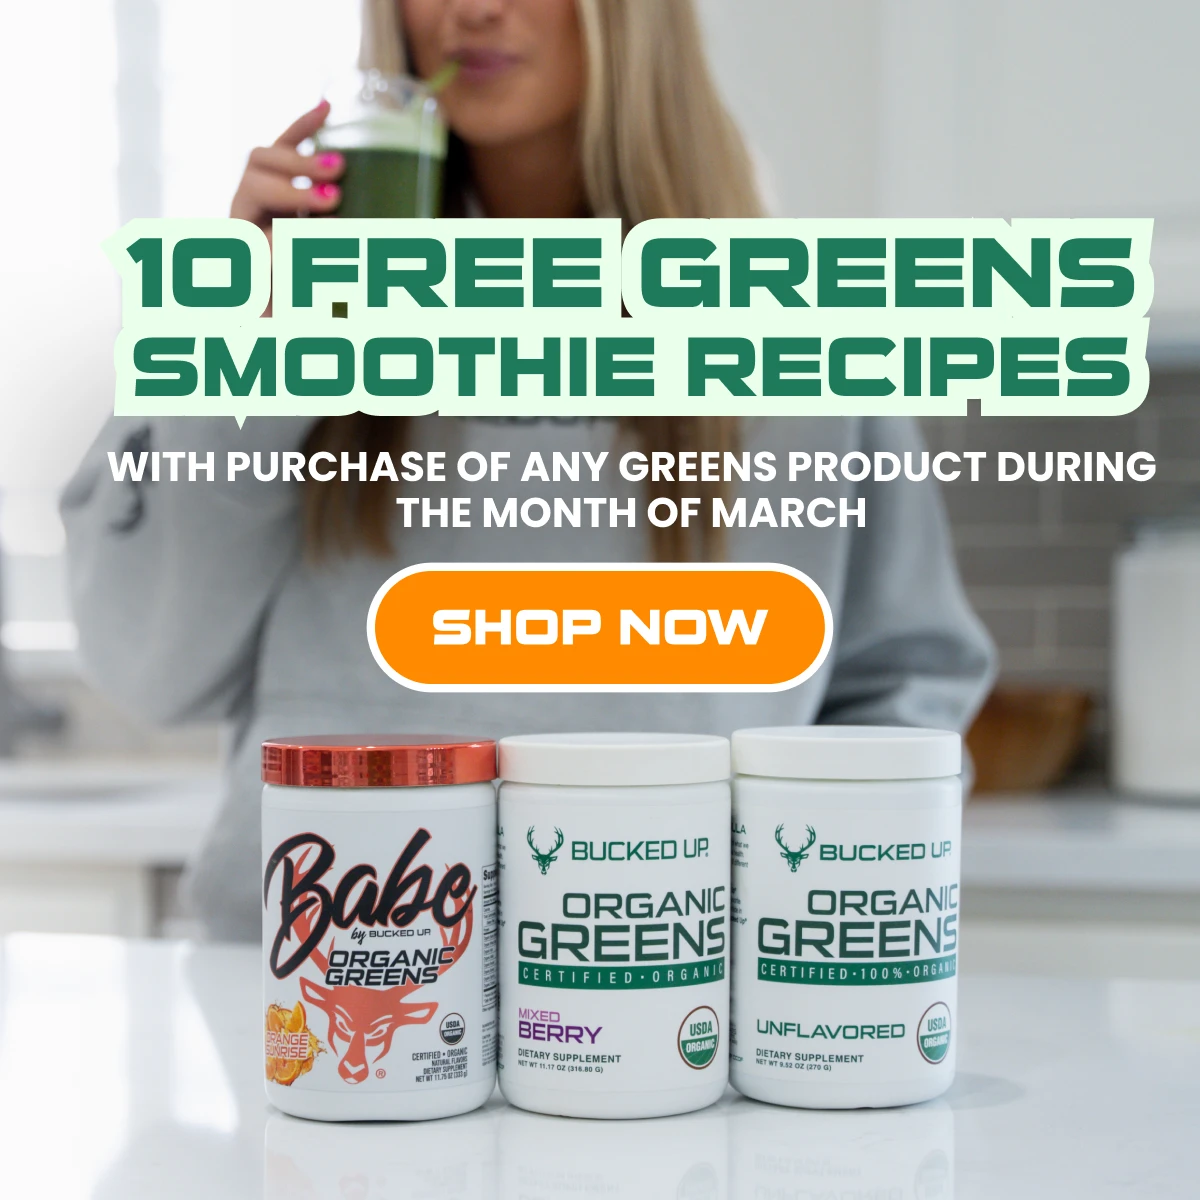 Greens Promo - Text says "10 free greens smoothie recipes with purchase of any greens product during the month of march" and the button says "shop now".  Background is of a woman drinking bucked up greens, and foreground has product im